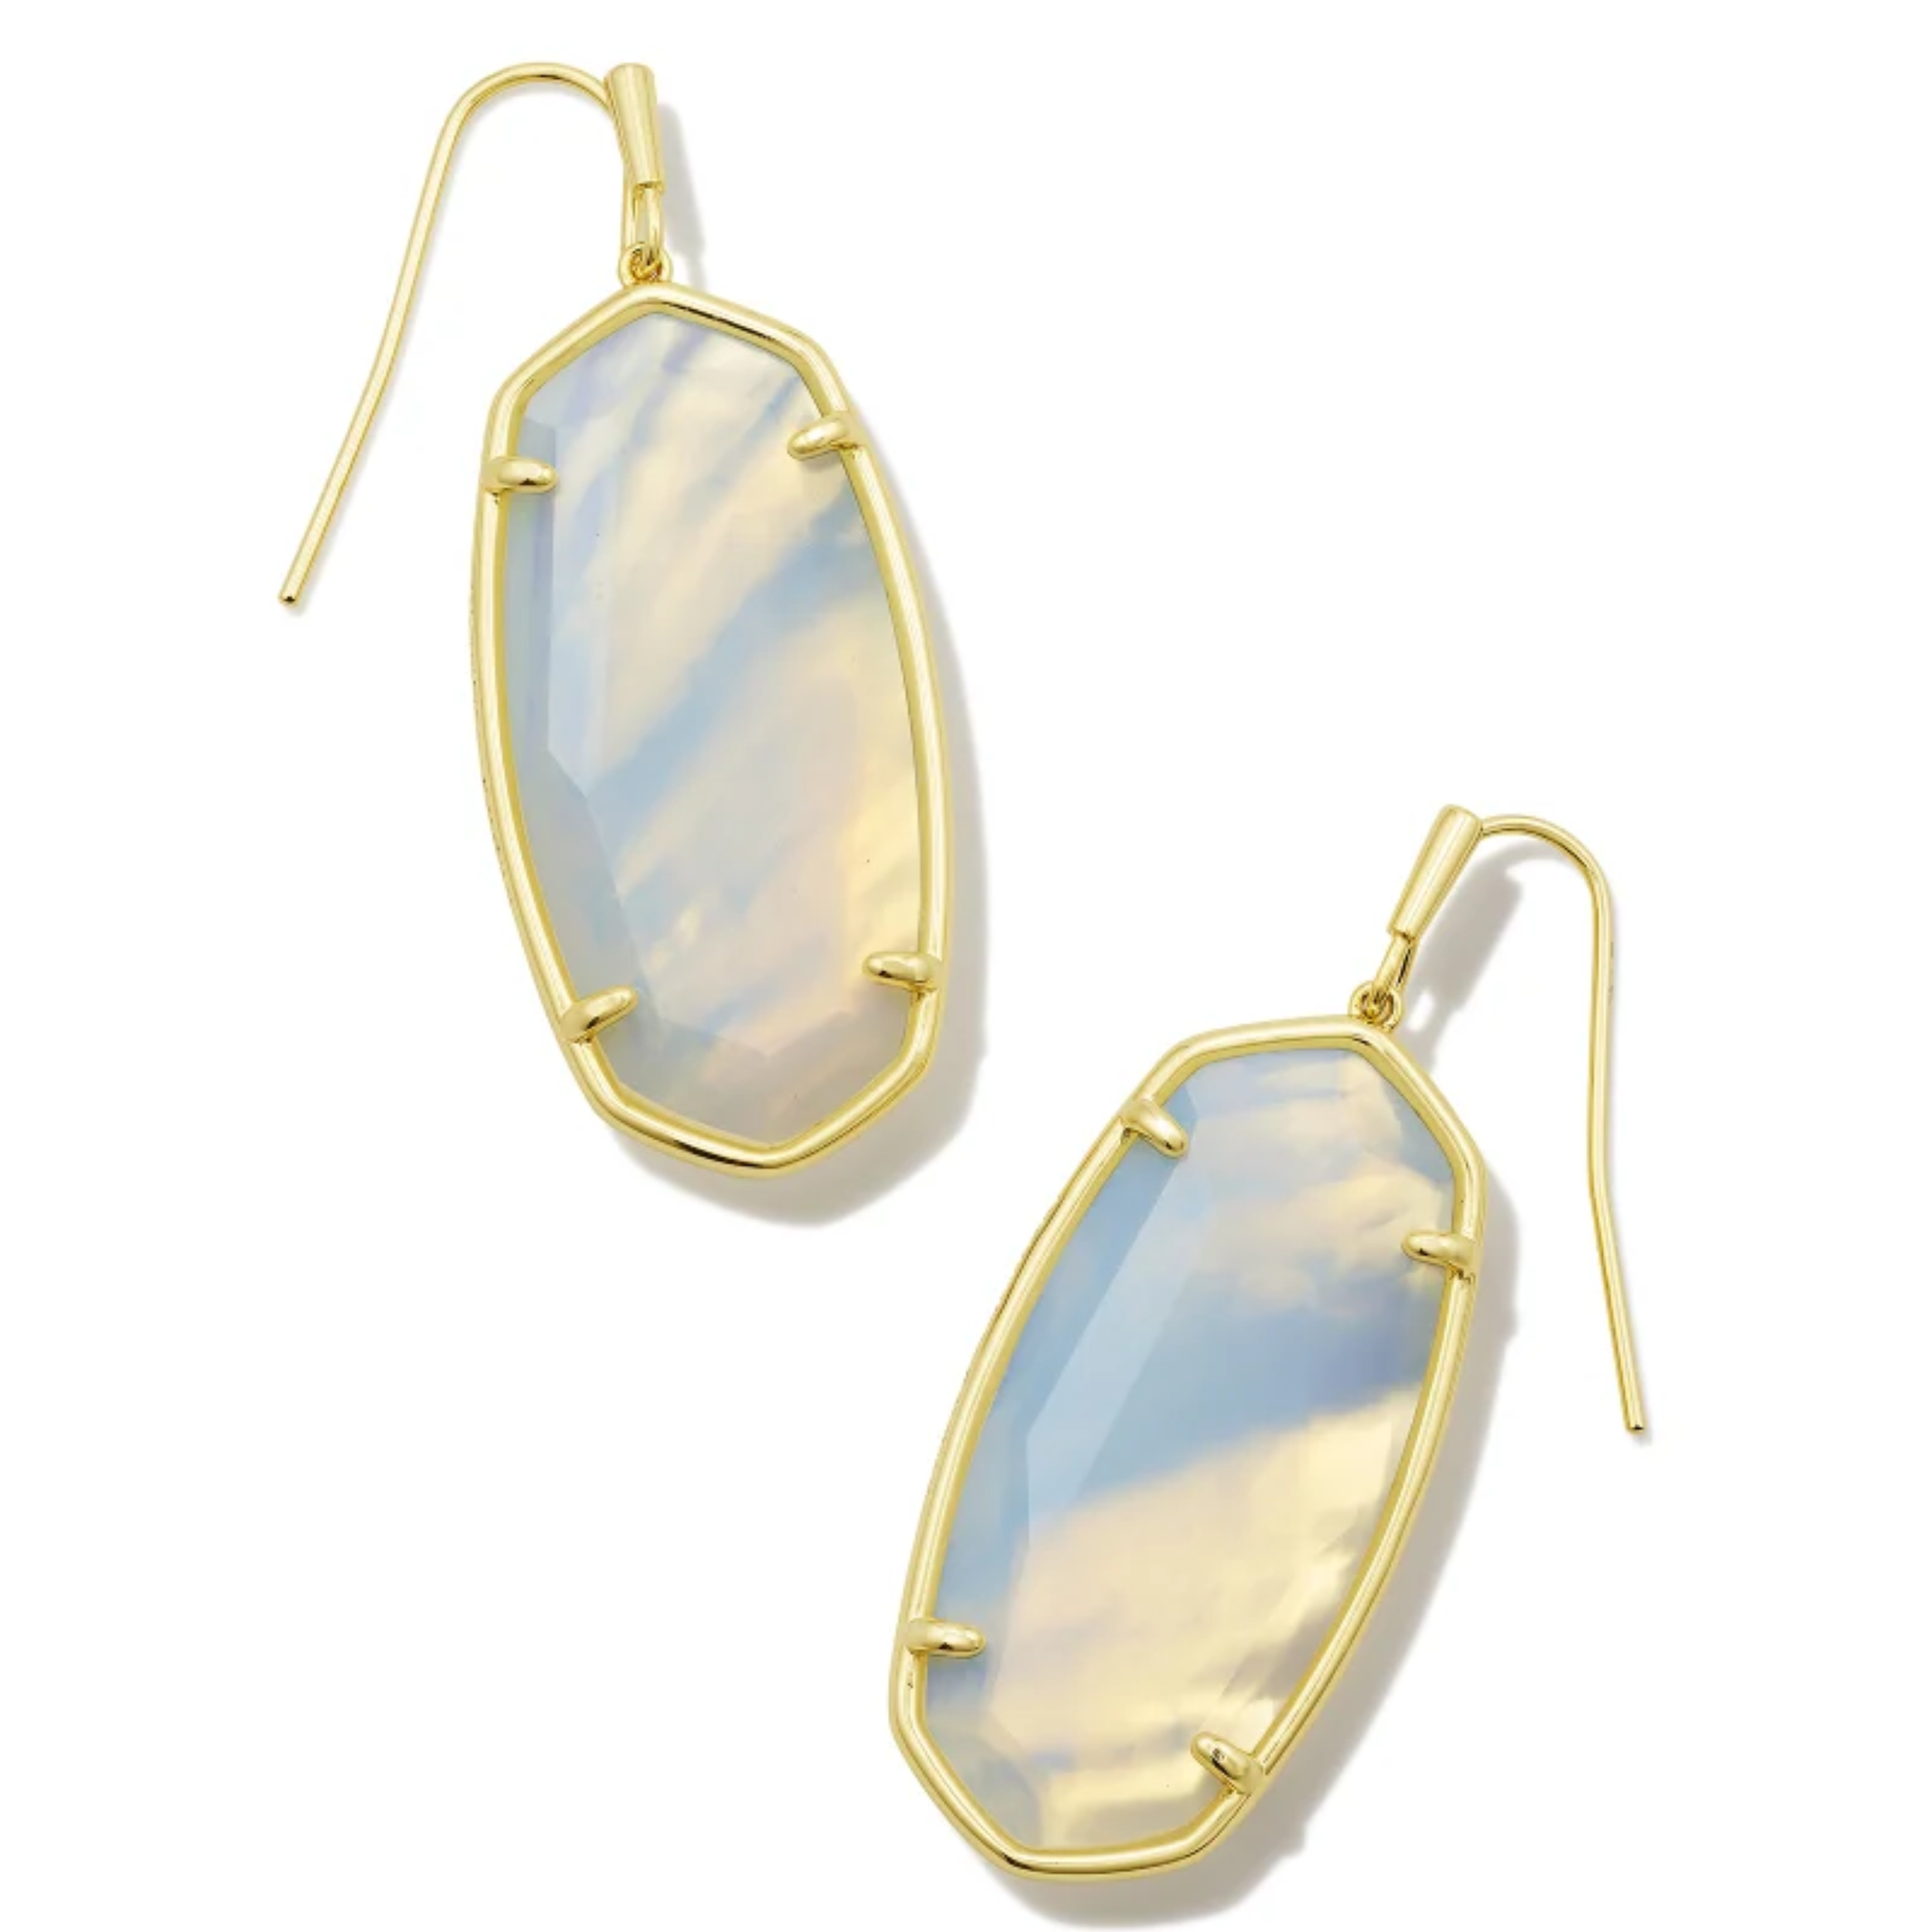 These Faceted Elle Gold Drop Earrings in Iridescent Opalite Illusion by Kendra Scott are pictured on a white background.